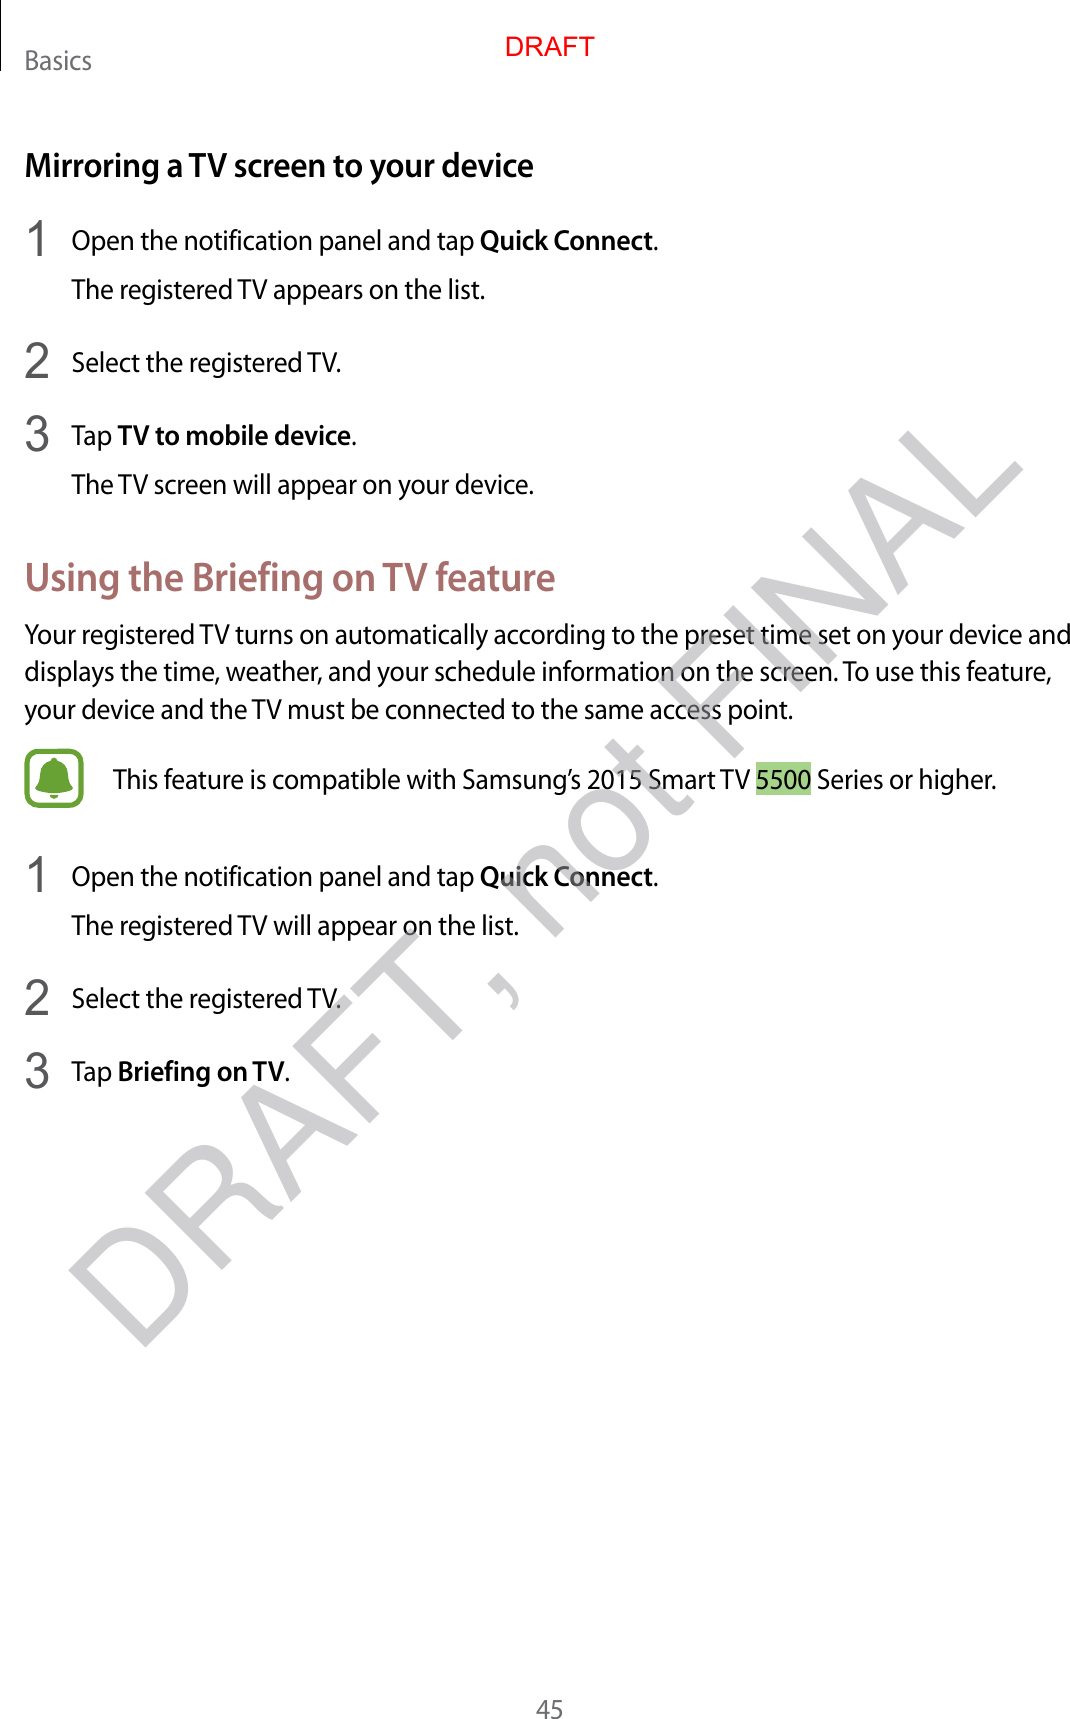 Basics45Mirroring a TV screen to your device1  Open the notification panel and tap Quick Connect.The registered TV appears on the list.2  Select the registered TV.3  Tap TV to mobile device.The TV screen will appear on your device.Using the Briefing on TV featureYour registered TV turns on automatically according to the preset time set on your device and displays the time, weather, and your schedule information on the screen. To use this feature, your device and the TV must be connected to the same access point.This feature is compatible with Samsung’s 2015 Smart TV 5500 Series or higher.1  Open the notification panel and tap Quick Connect.The registered TV will appear on the list.2  Select the registered TV.3  Tap Briefing on TV.DRAFTDRAFT, not FINAL